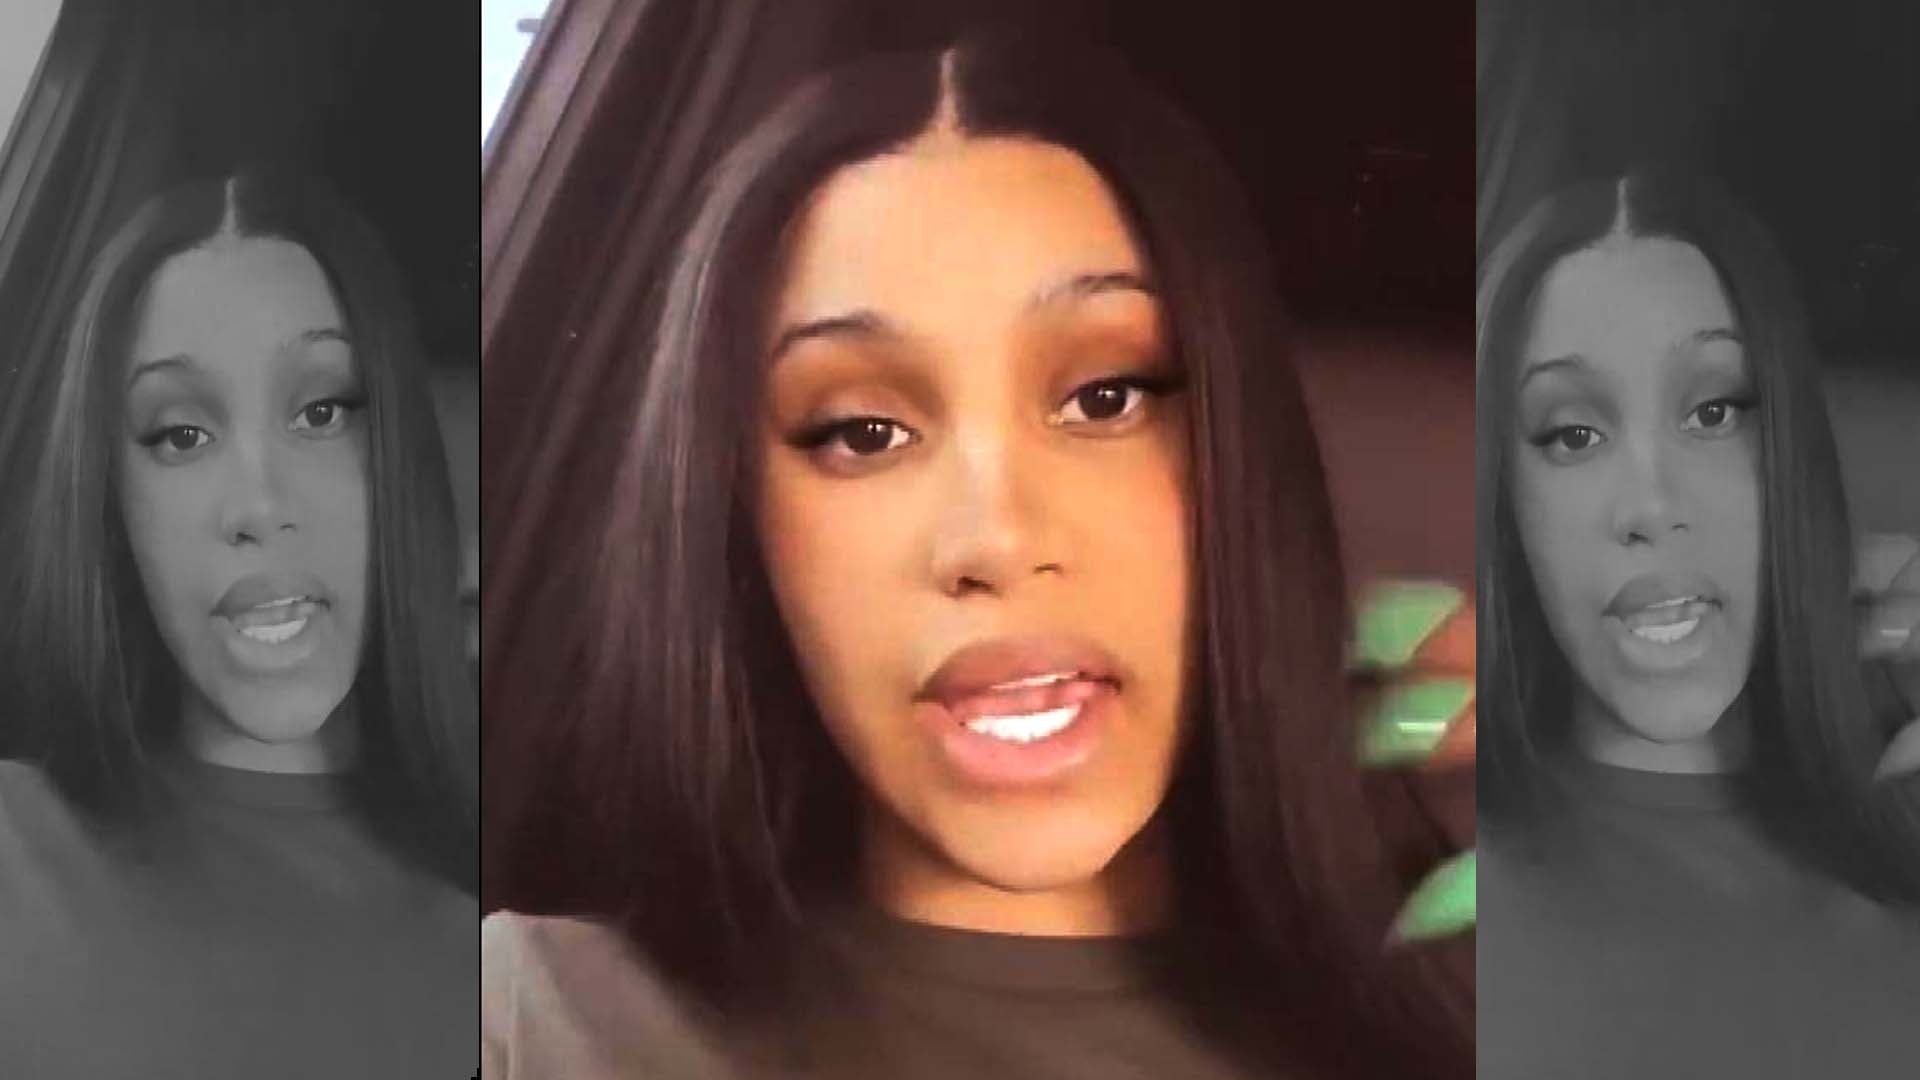 Cardi B Says That She's Sick of Getting 'Dragged' Online